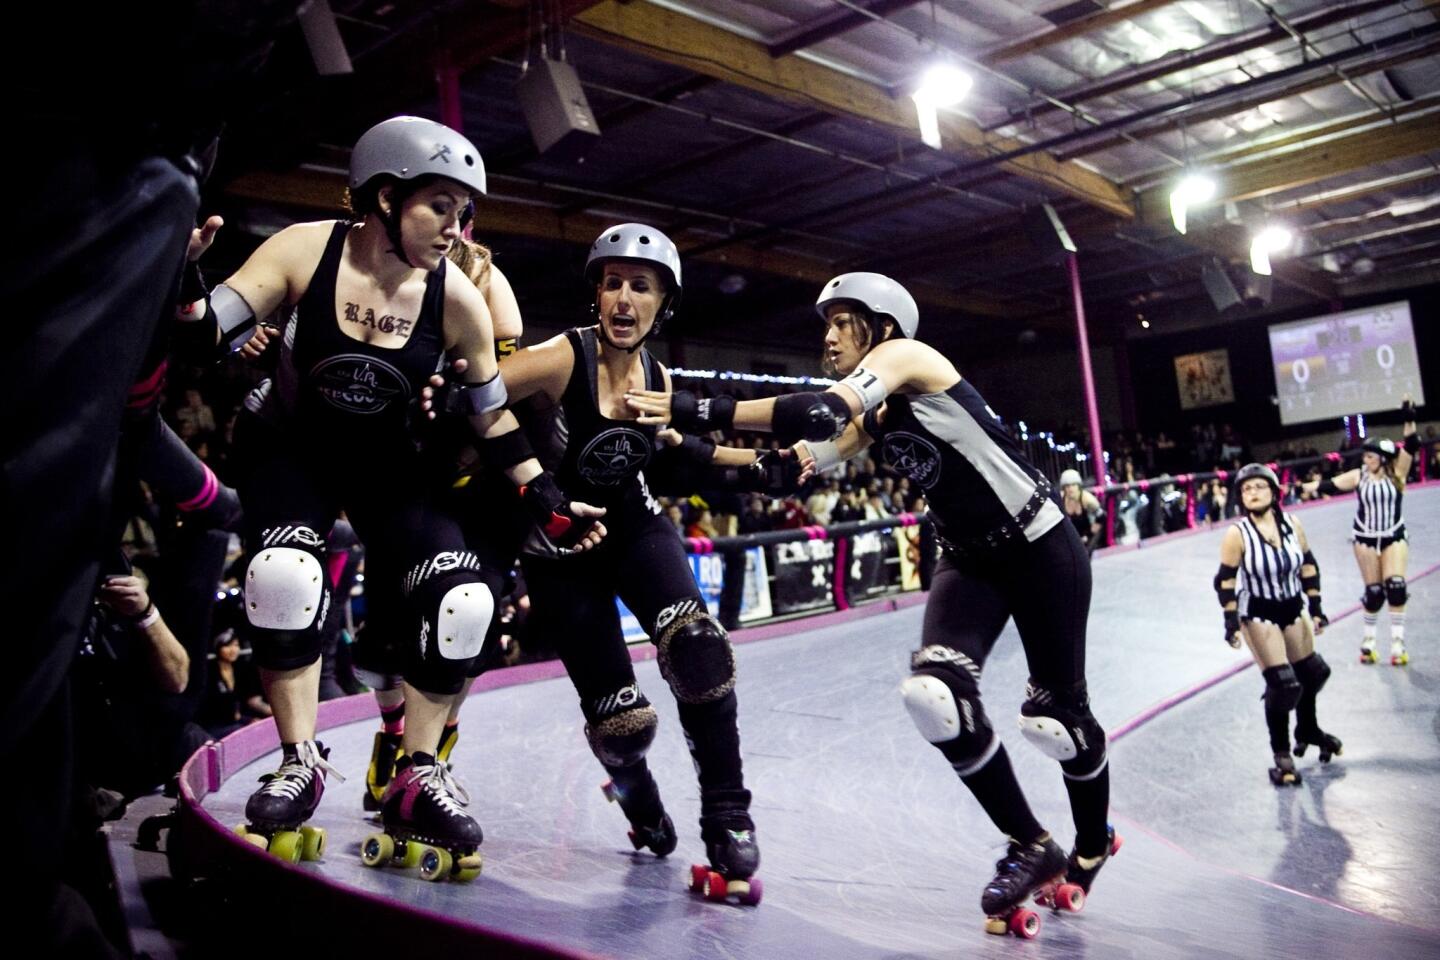 The Ri-Ettes, a member of the Los Angeles Derby Dolls roller derby league, battle the Pennsylvania All Star Rollers at the "Doll Factory" in L.A.'s Historic Filipinotown. The Ri-Ettes prevailed.